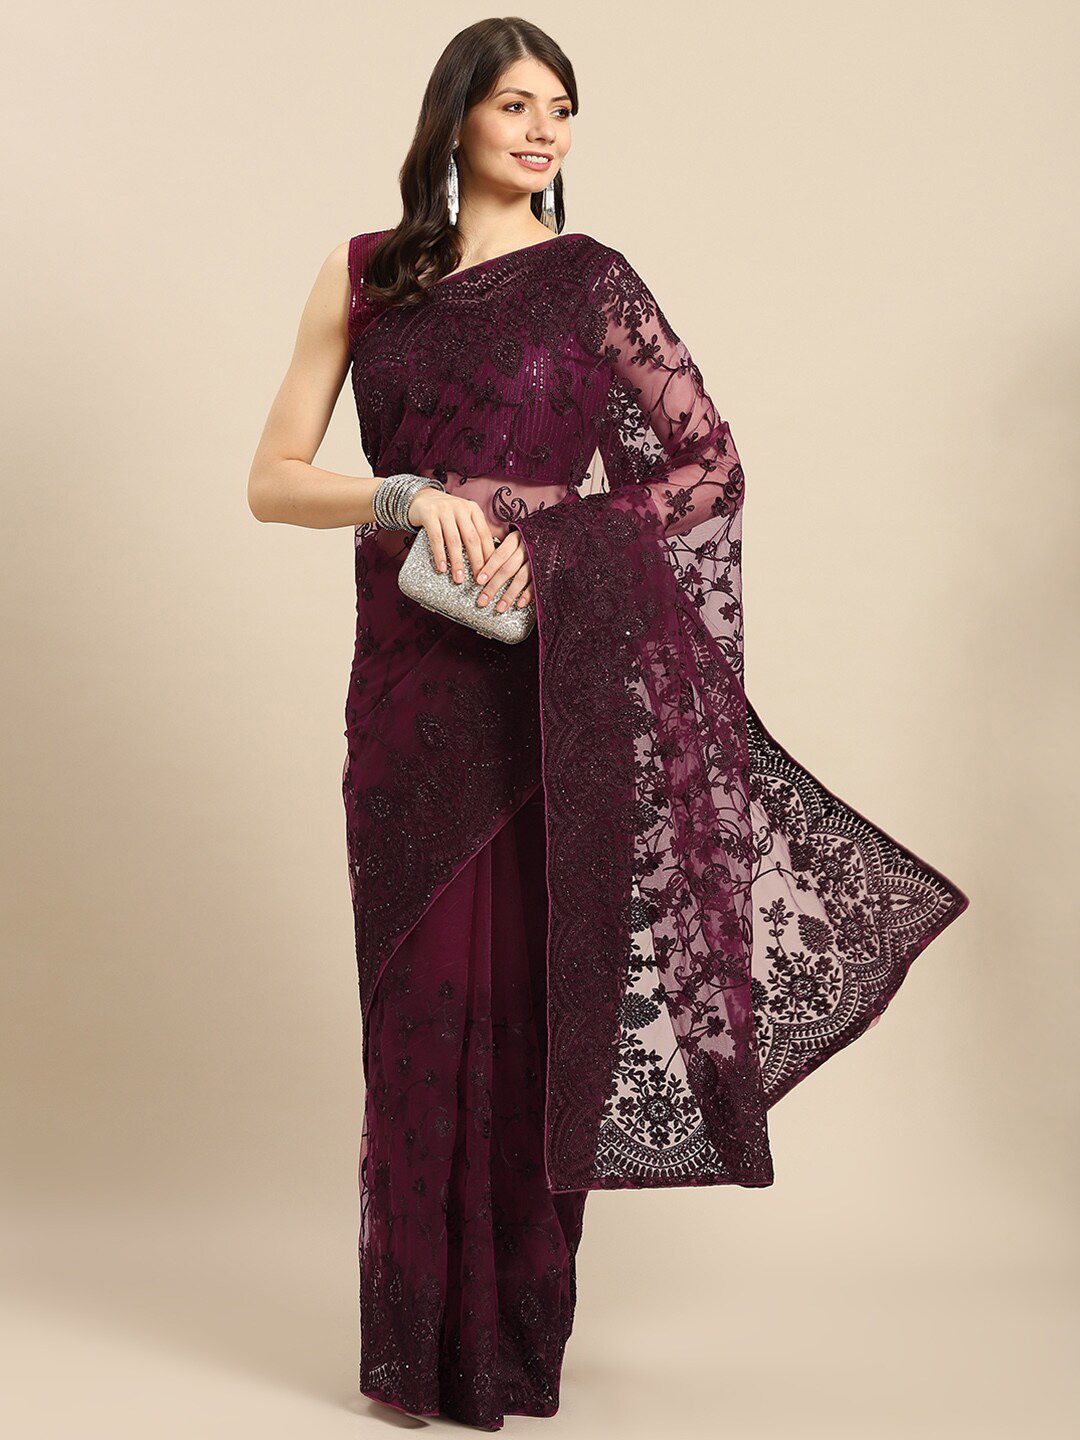 all about you Purple Floral Beads and Stones Net Mangalagiri Saree Price in India